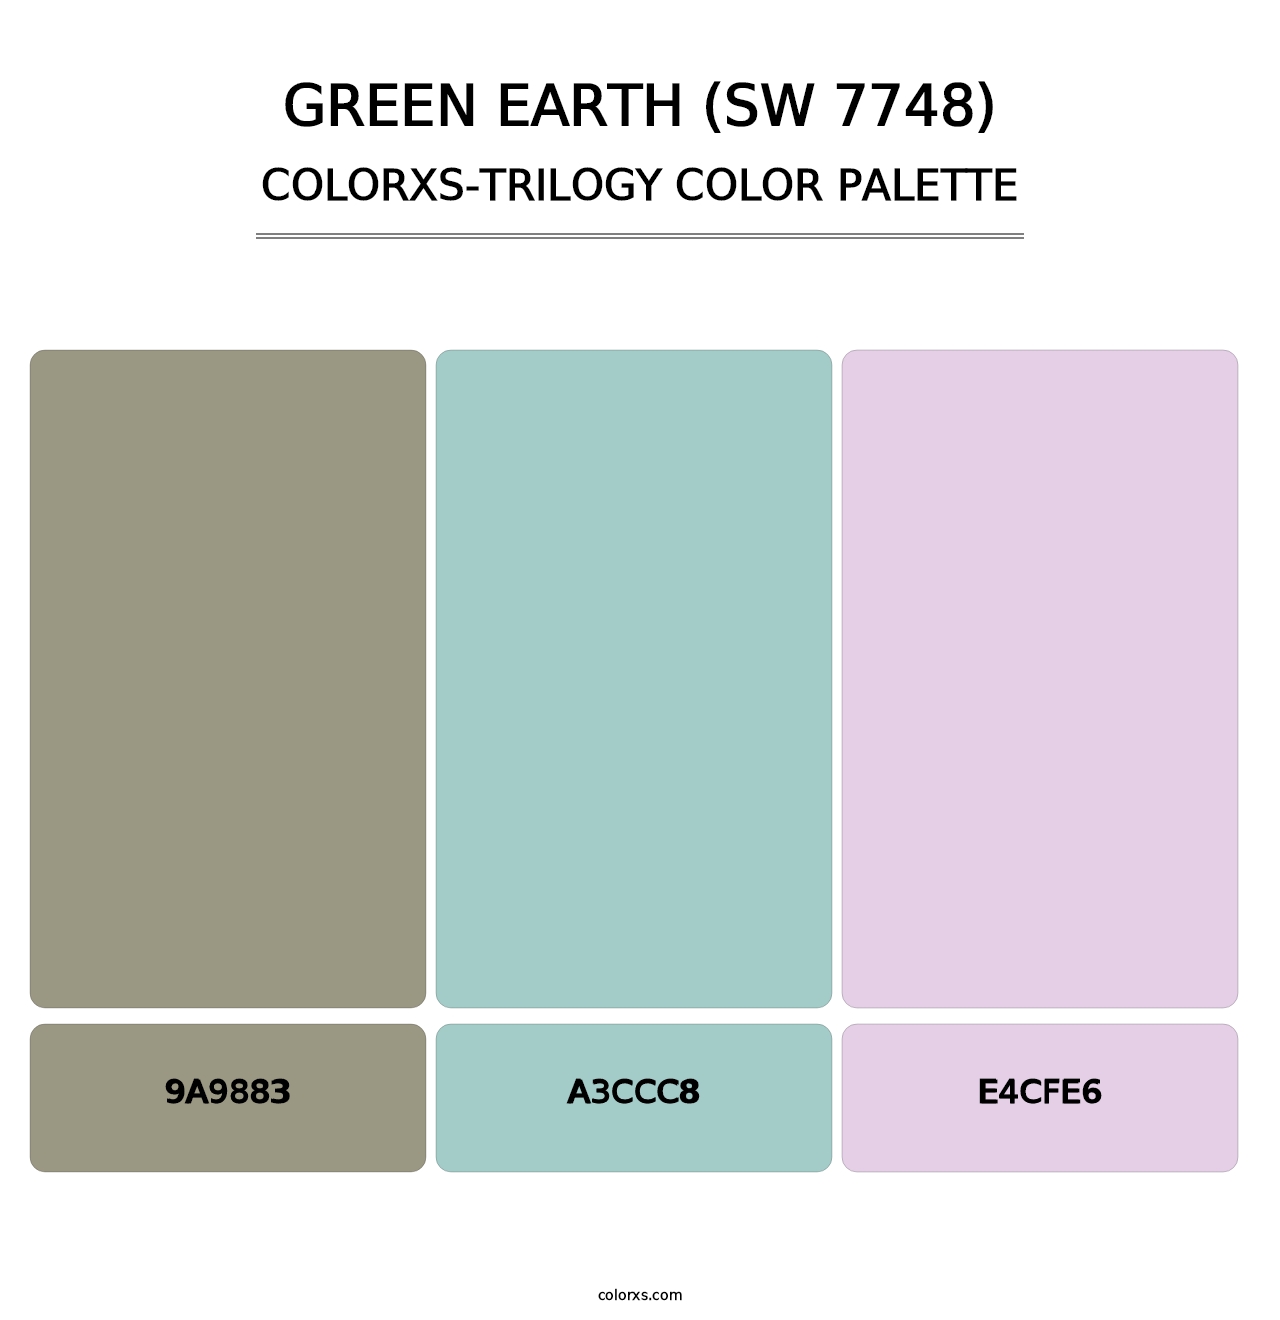 Green Earth (SW 7748) - Colorxs Trilogy Palette